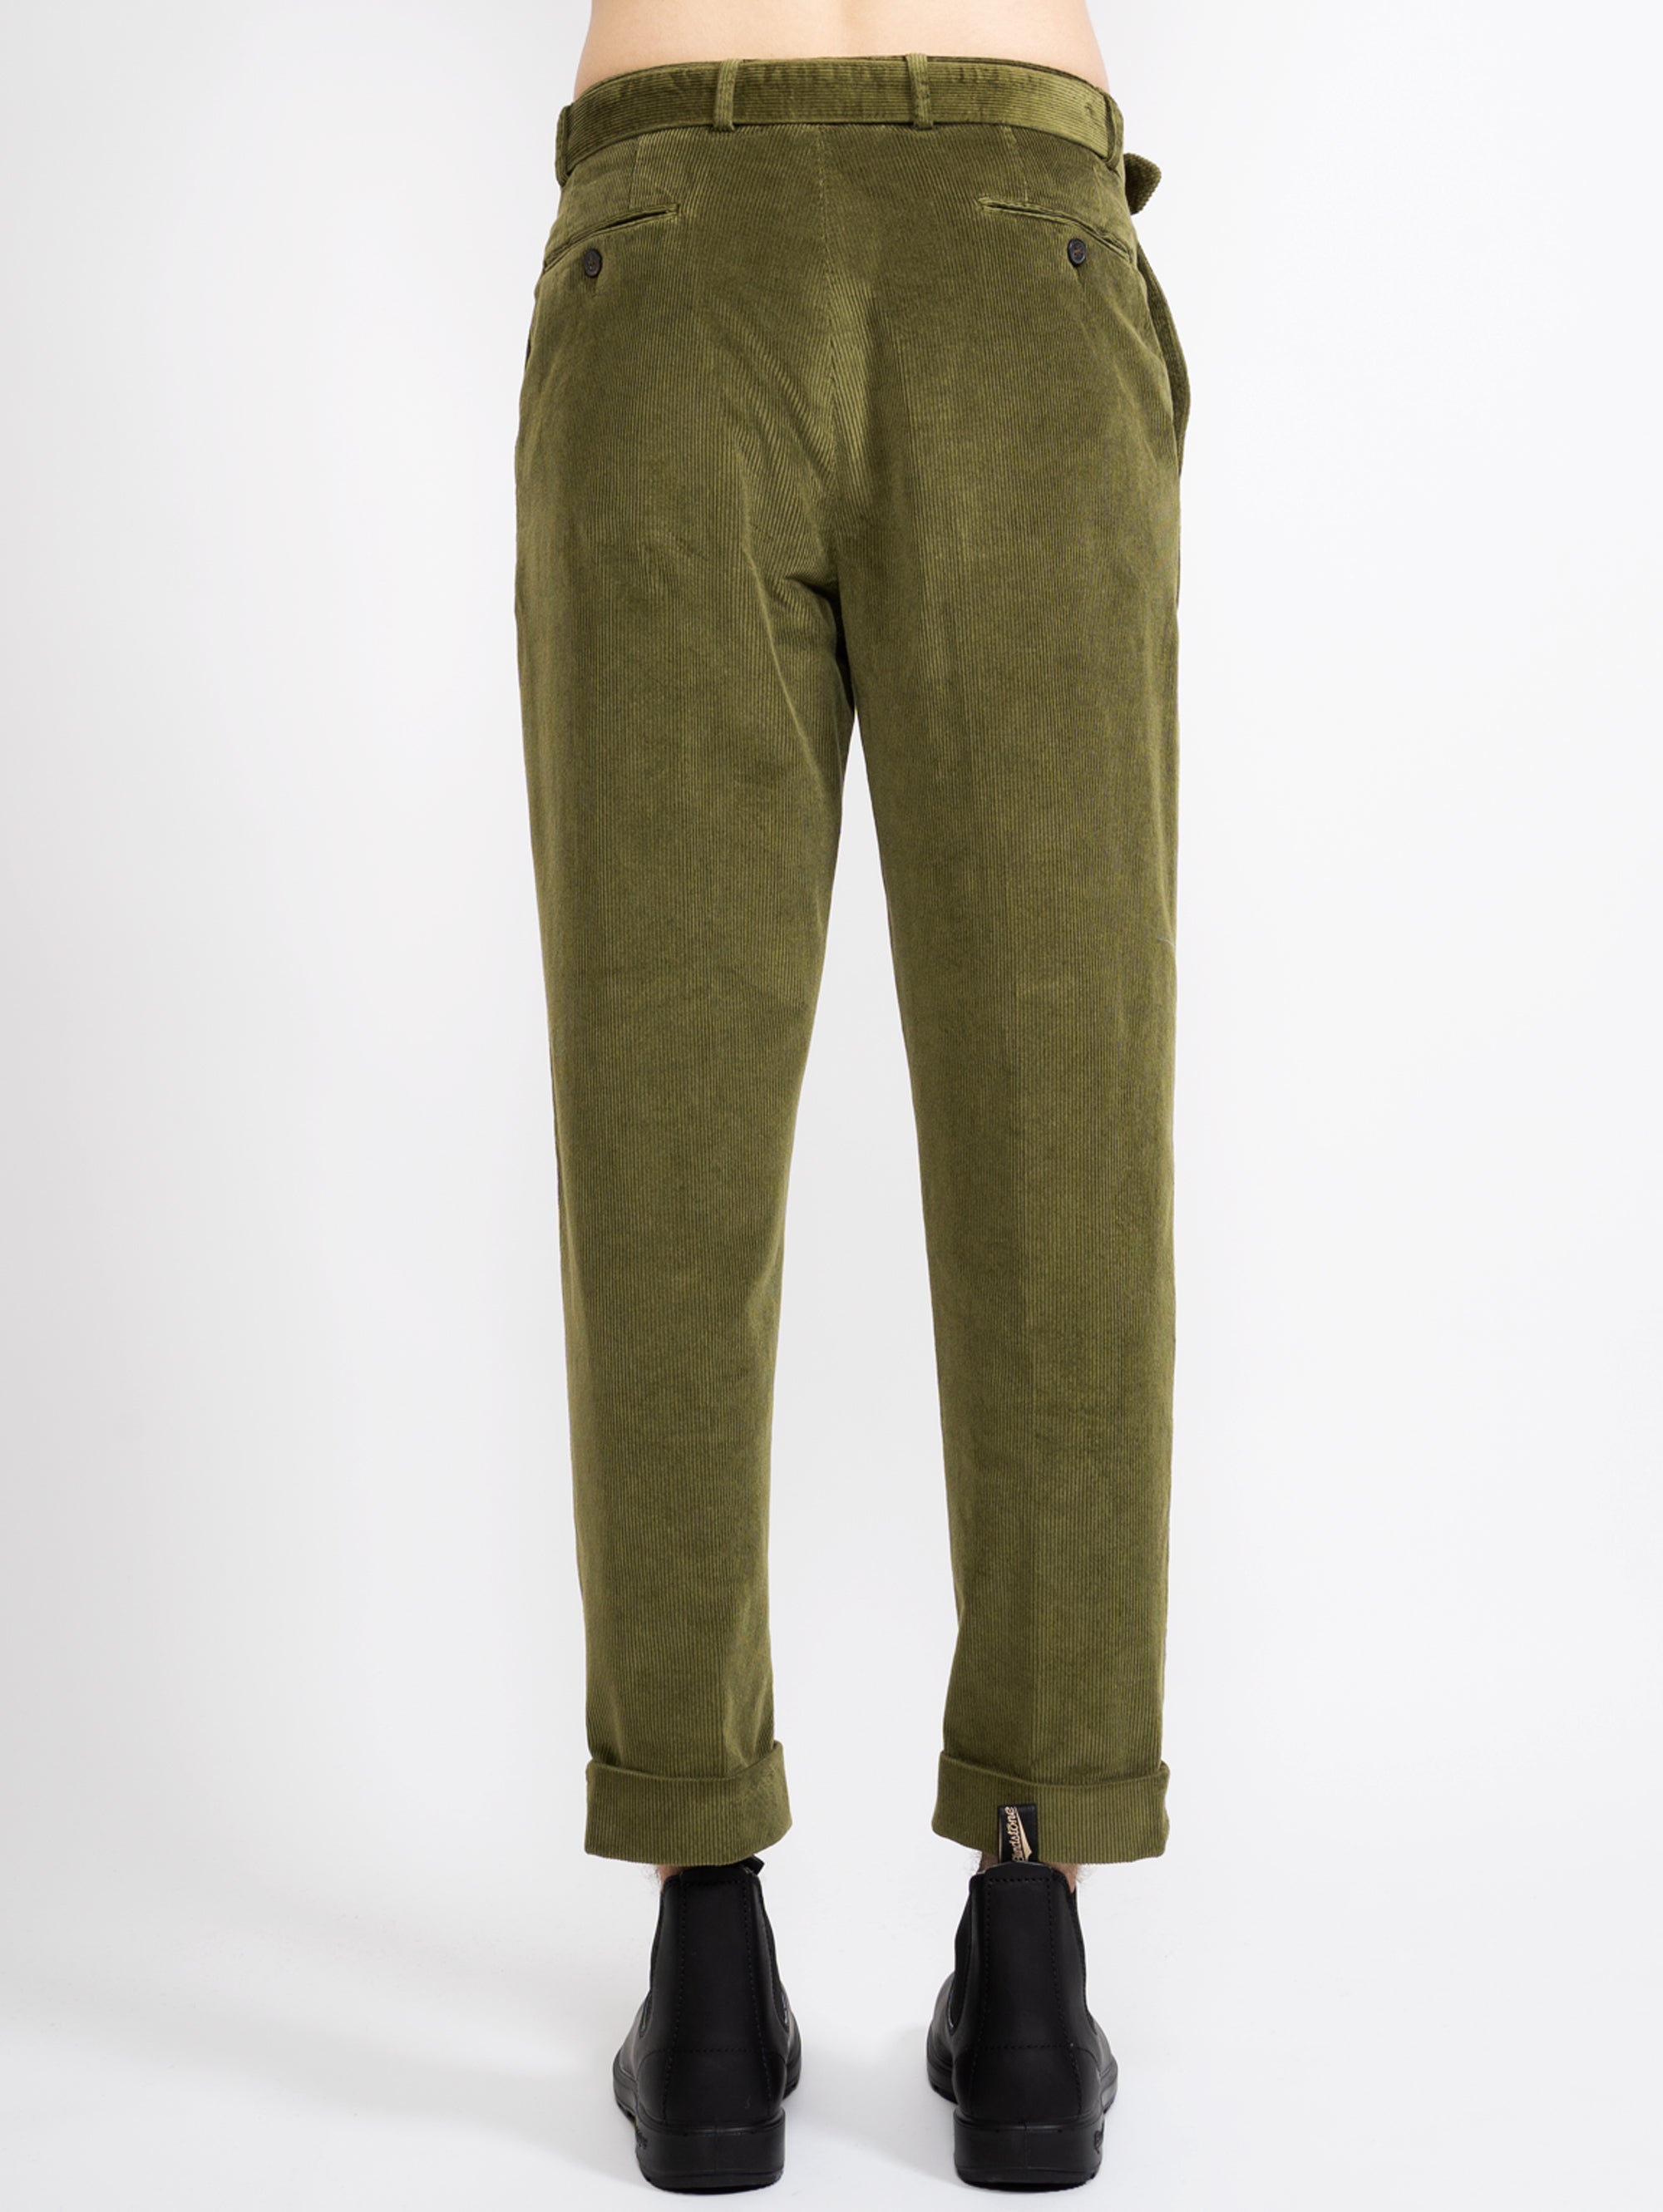 Velvet Trousers with Green Pences